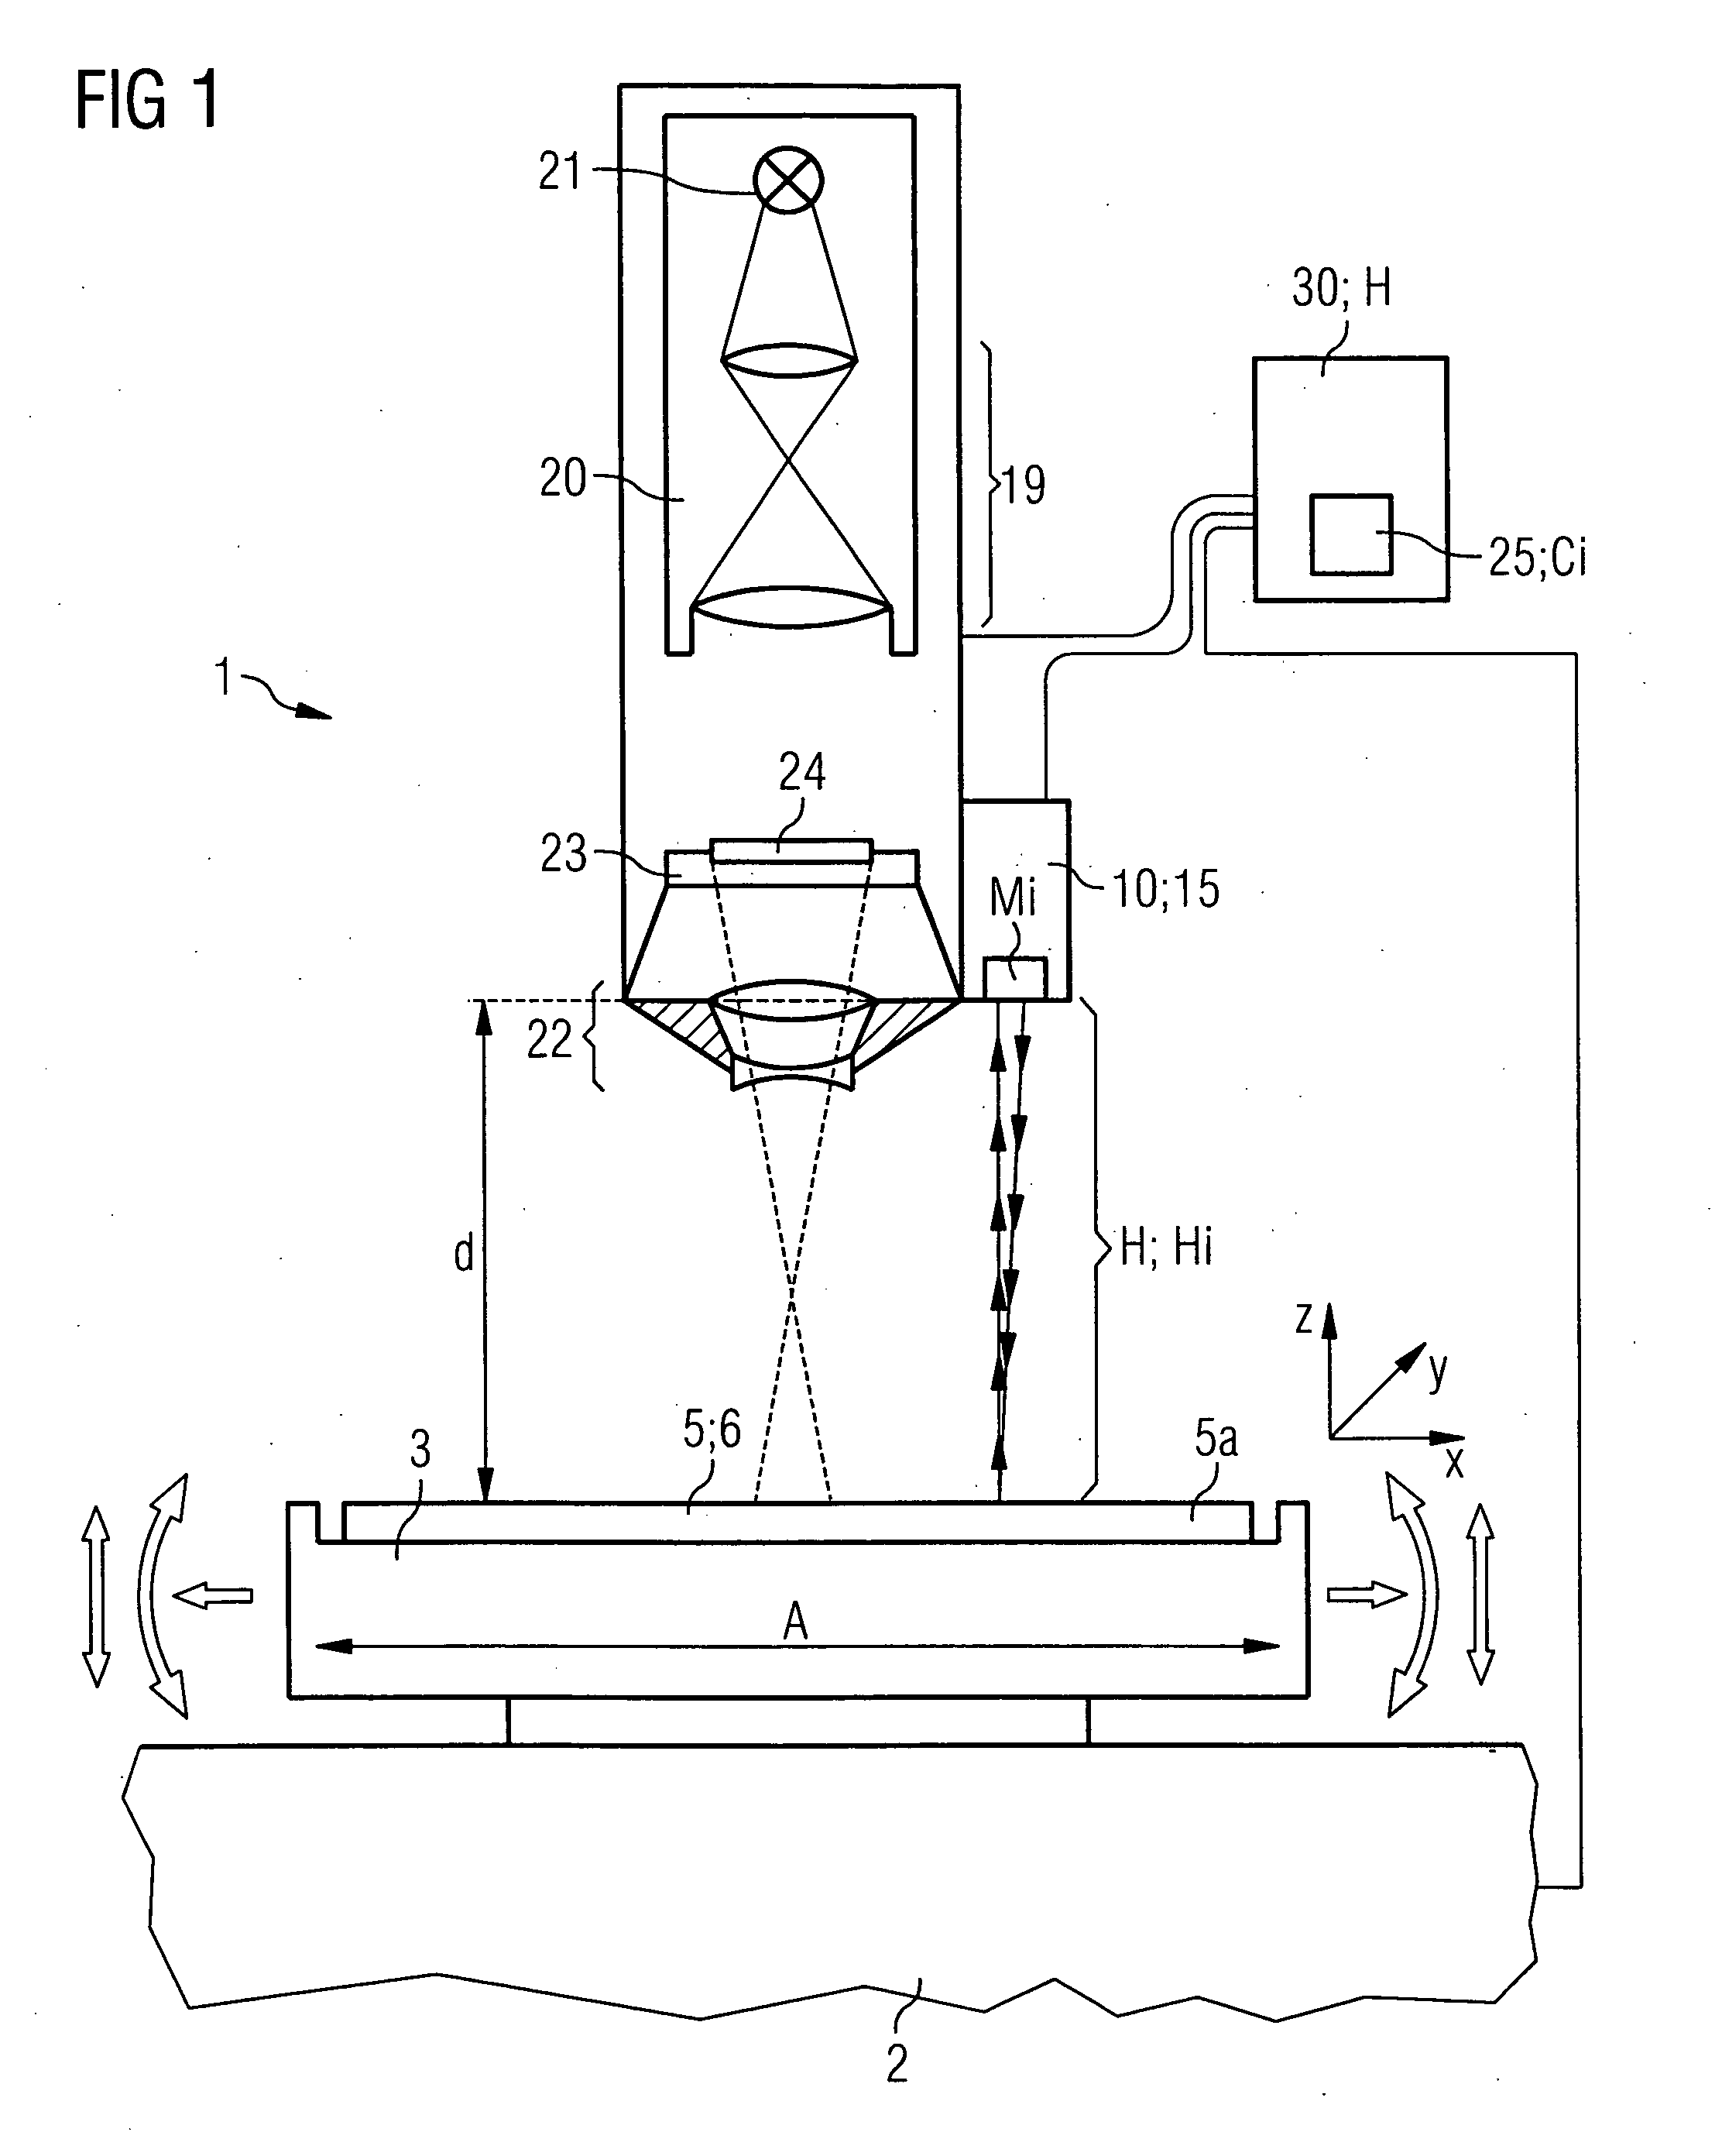 Wafer exposure device and method